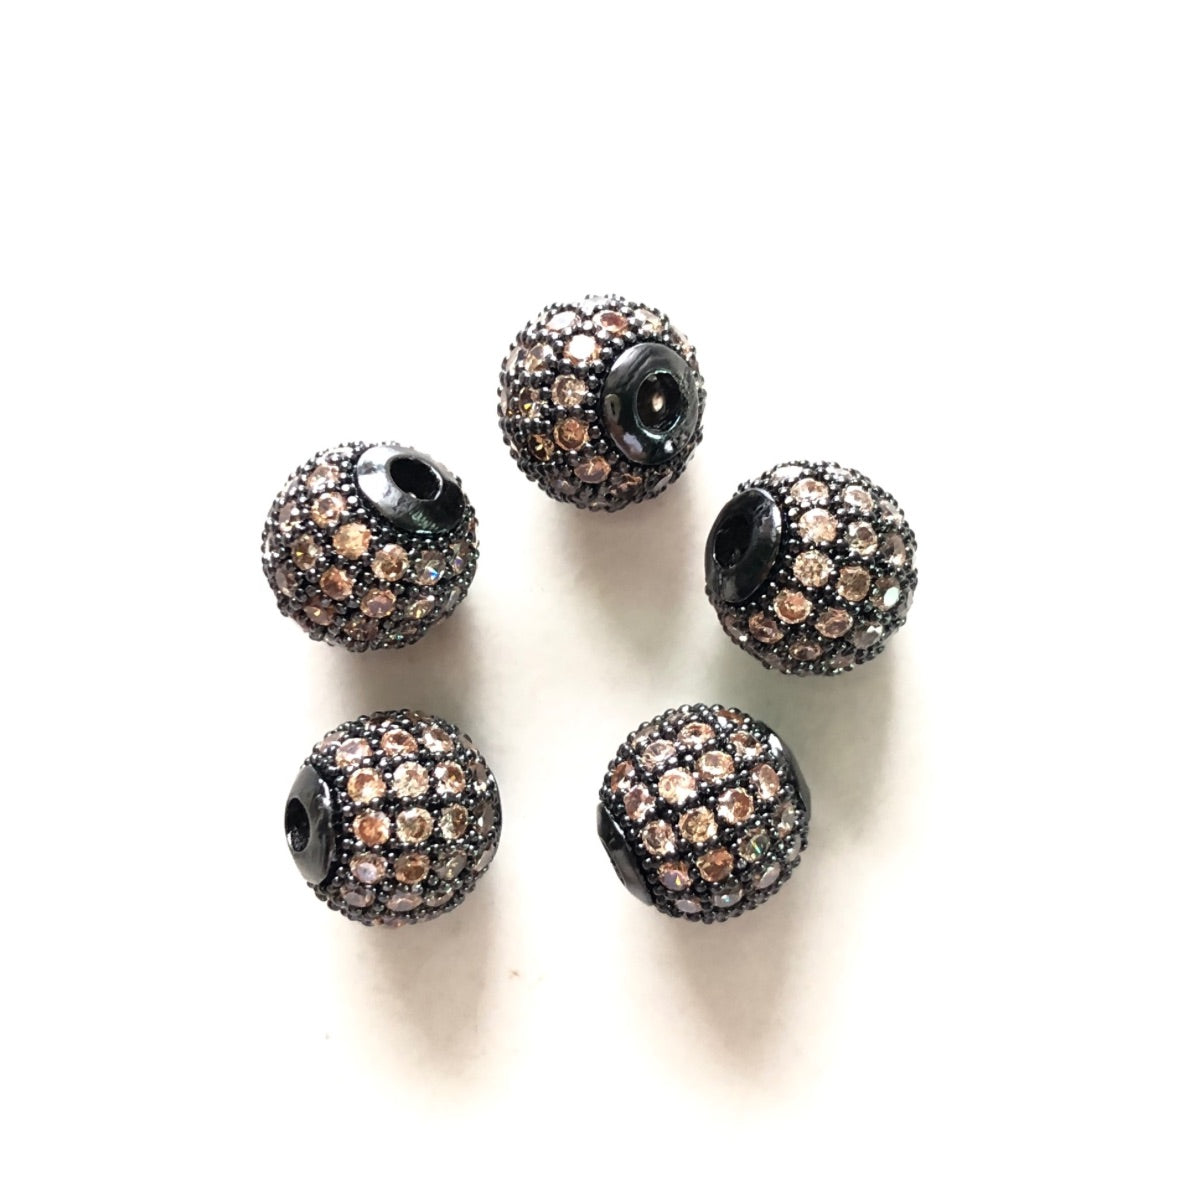 10pcs/lot 6mm, 8mm Colorful CZ Paved Ball Spacers Black Champange CZ Paved Spacers 6mm Beads 8mm Beads Ball Beads Colorful Zirconia New Spacers Arrivals Charms Beads Beyond